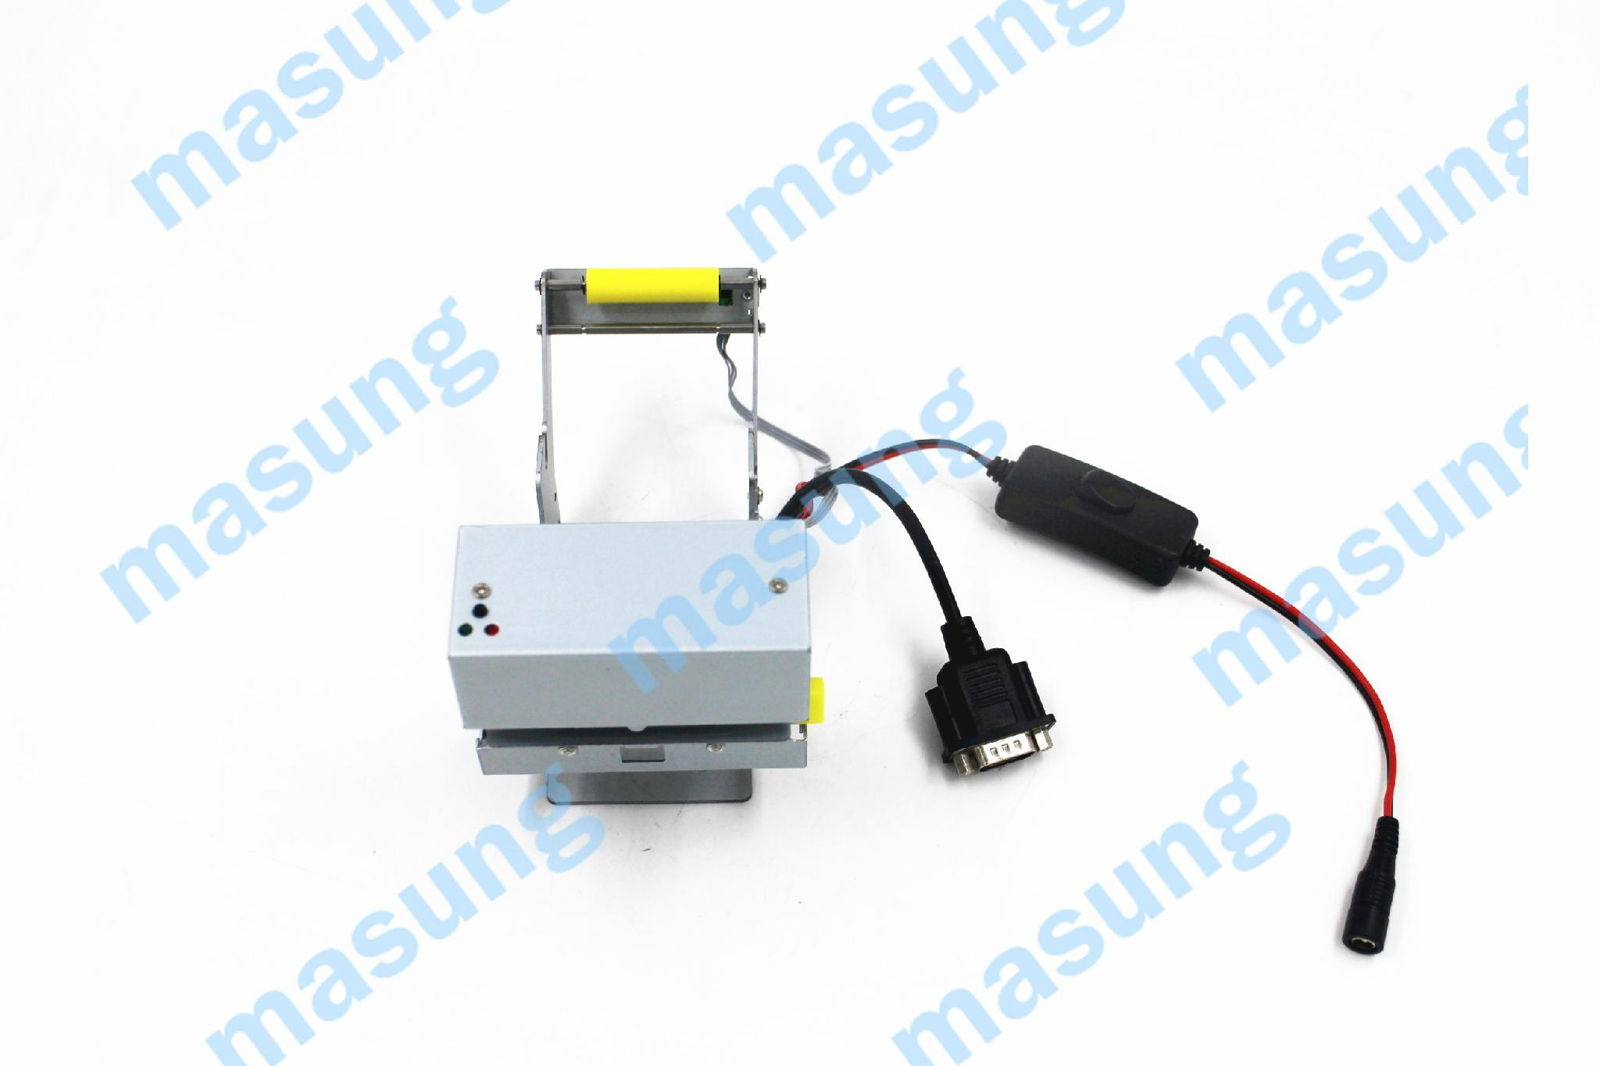 2inch supermarket kiosk printer with last ticket detection function 2